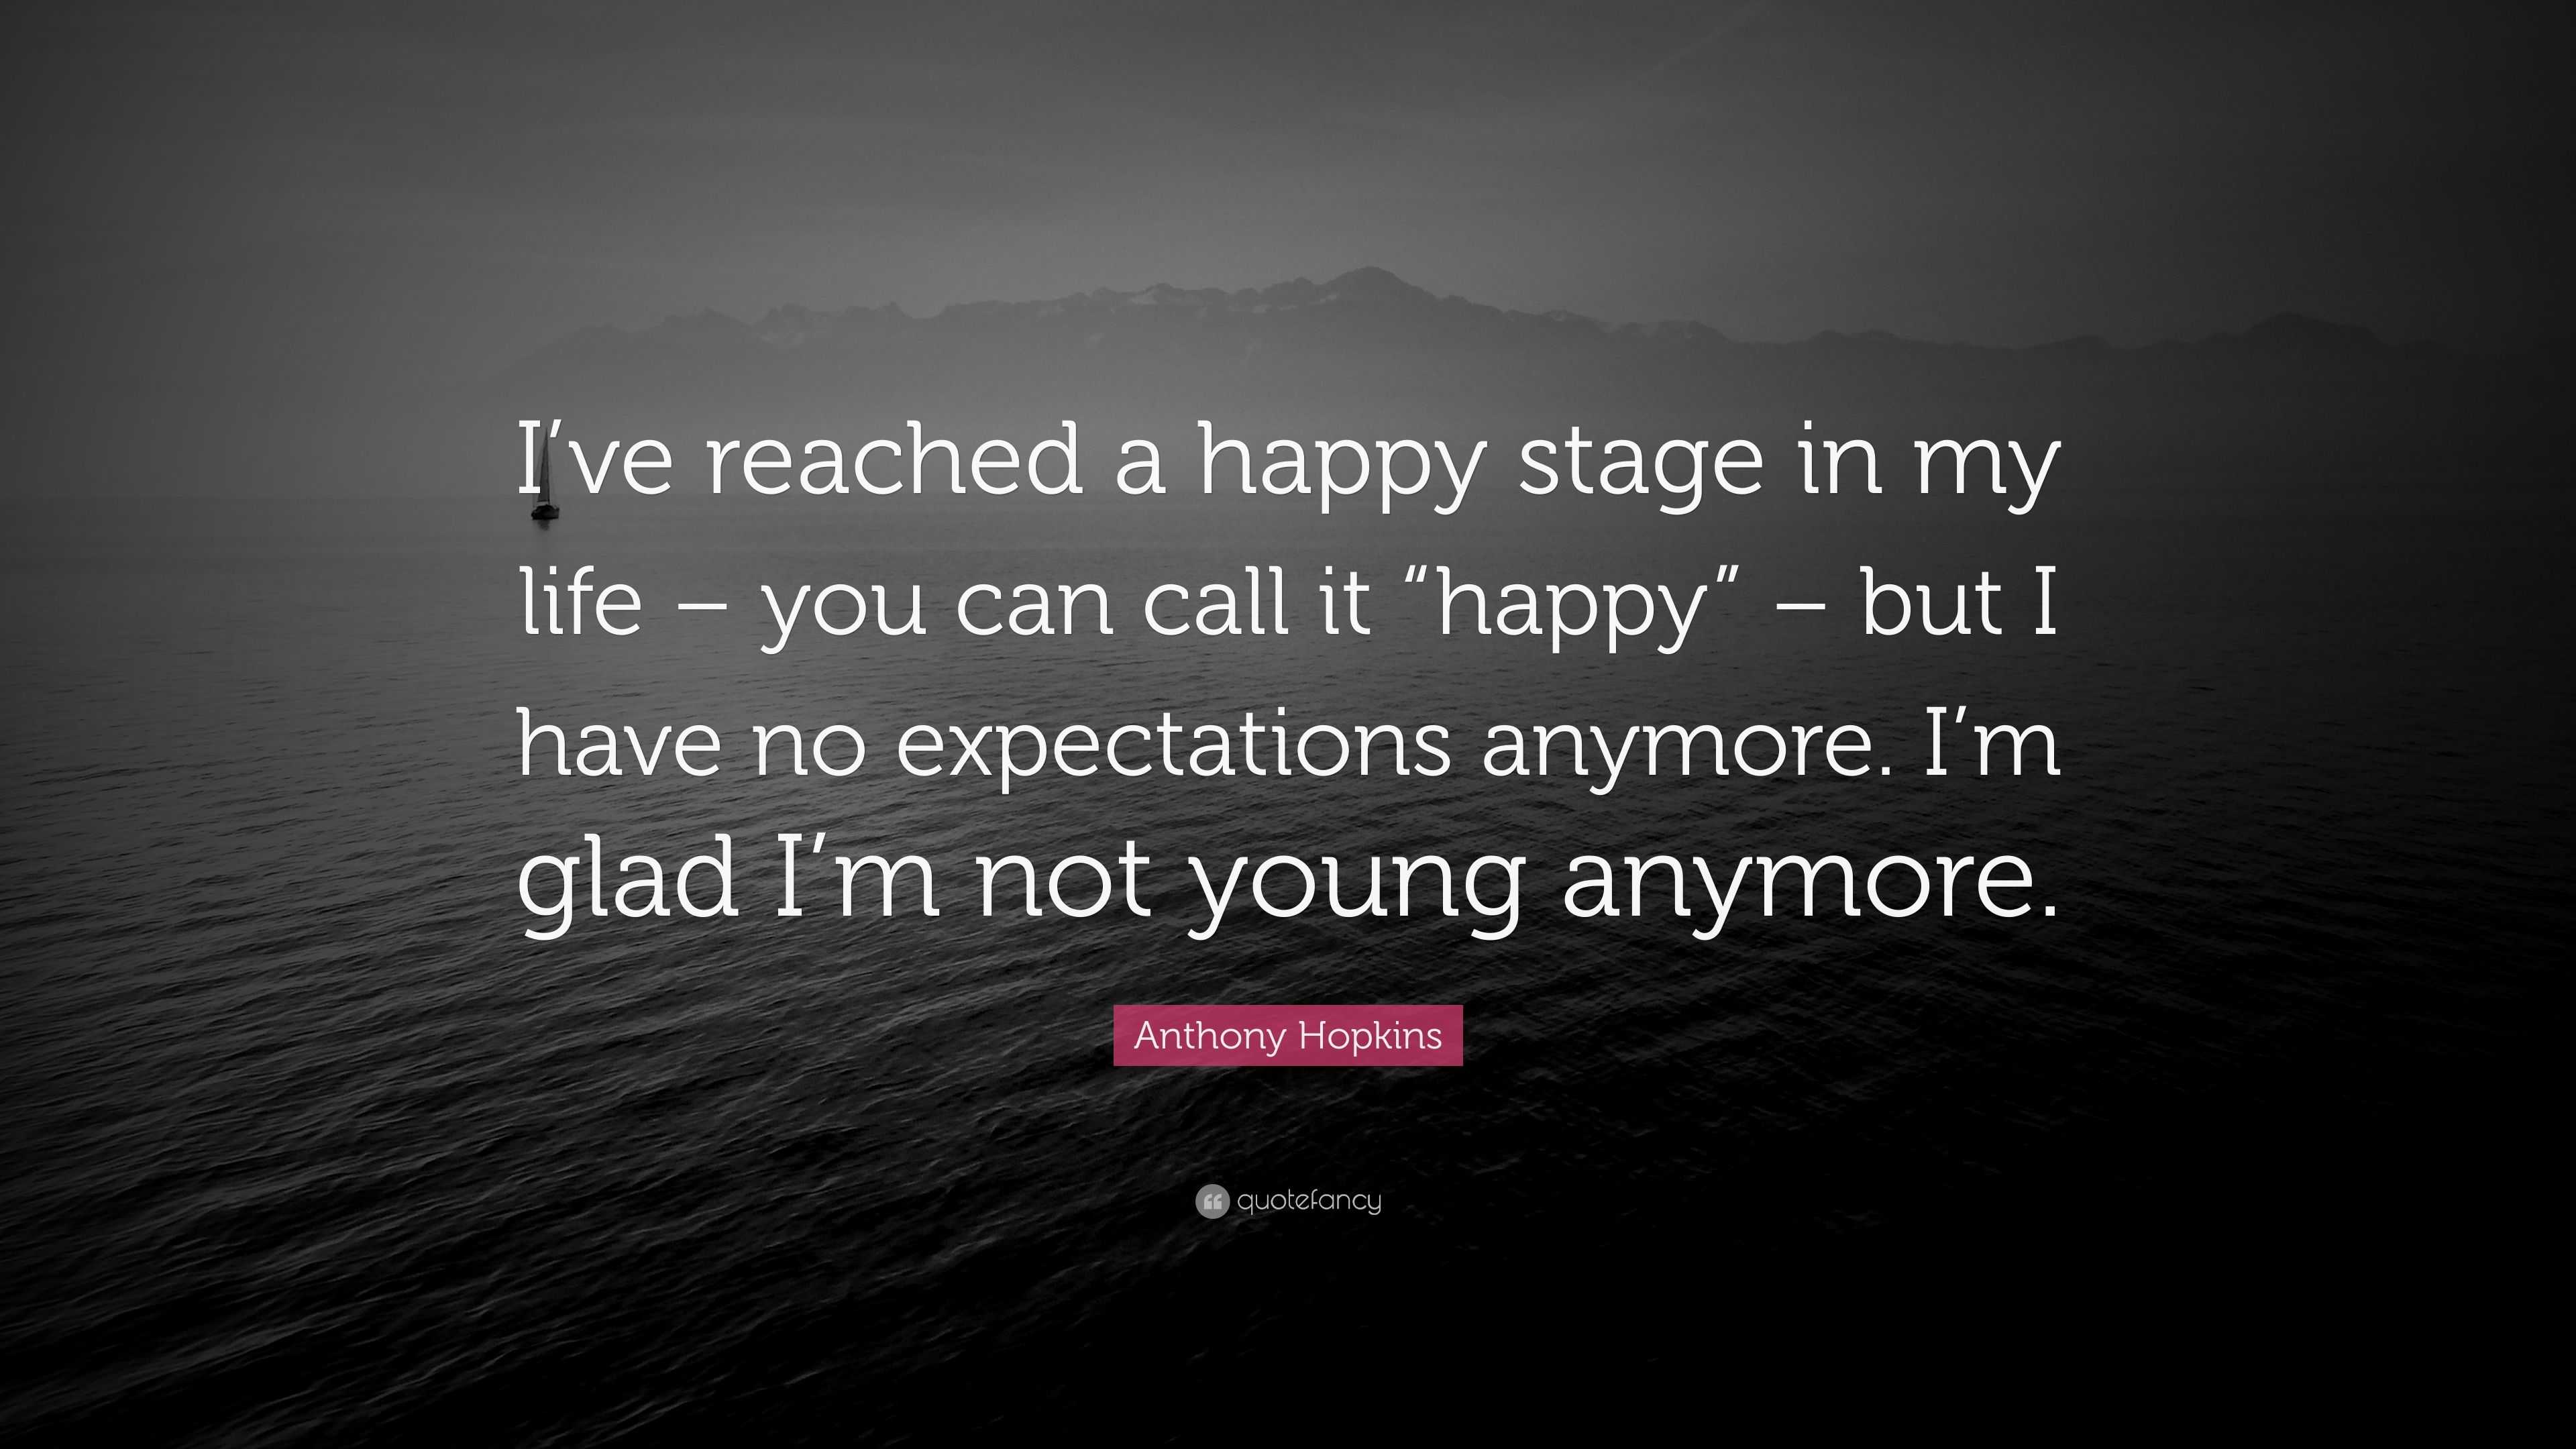 Anthony Hopkins Quote “I ve reached a happy stage in my life –